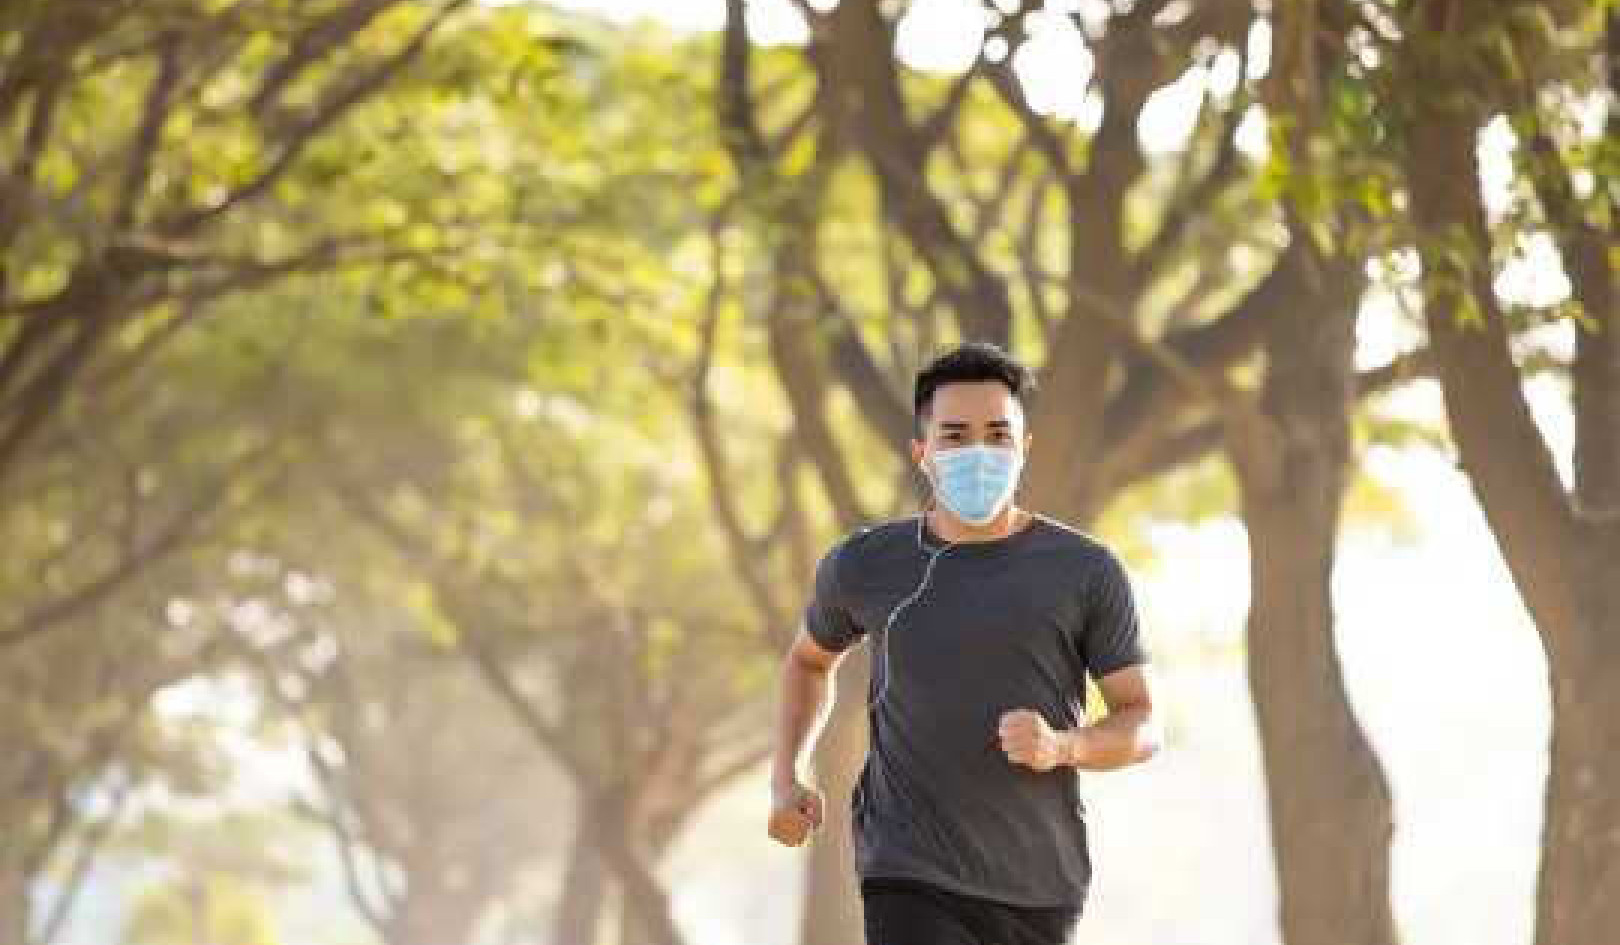 Why Joggers and Cyclists Should Wear Masks